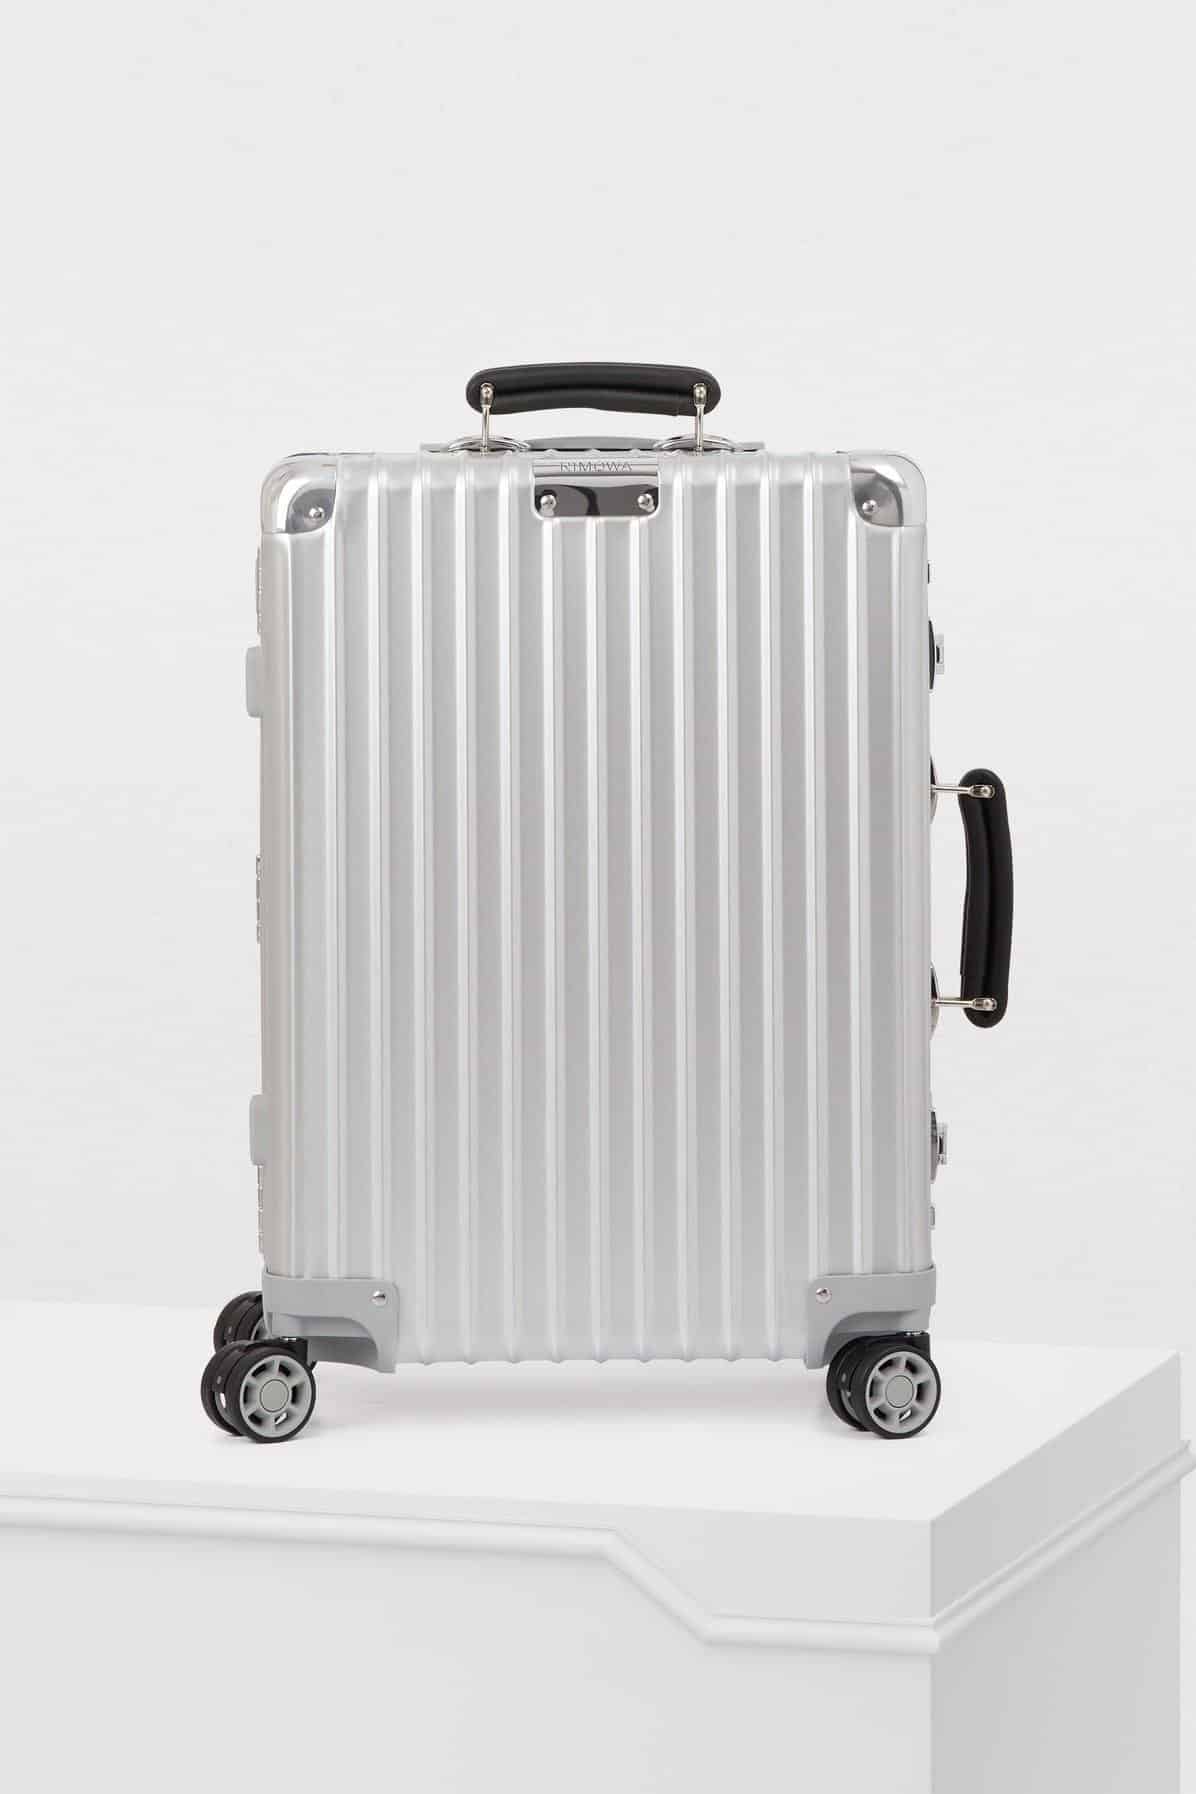 Why Is Rimowa So Expensive? - Luggage Unpacked